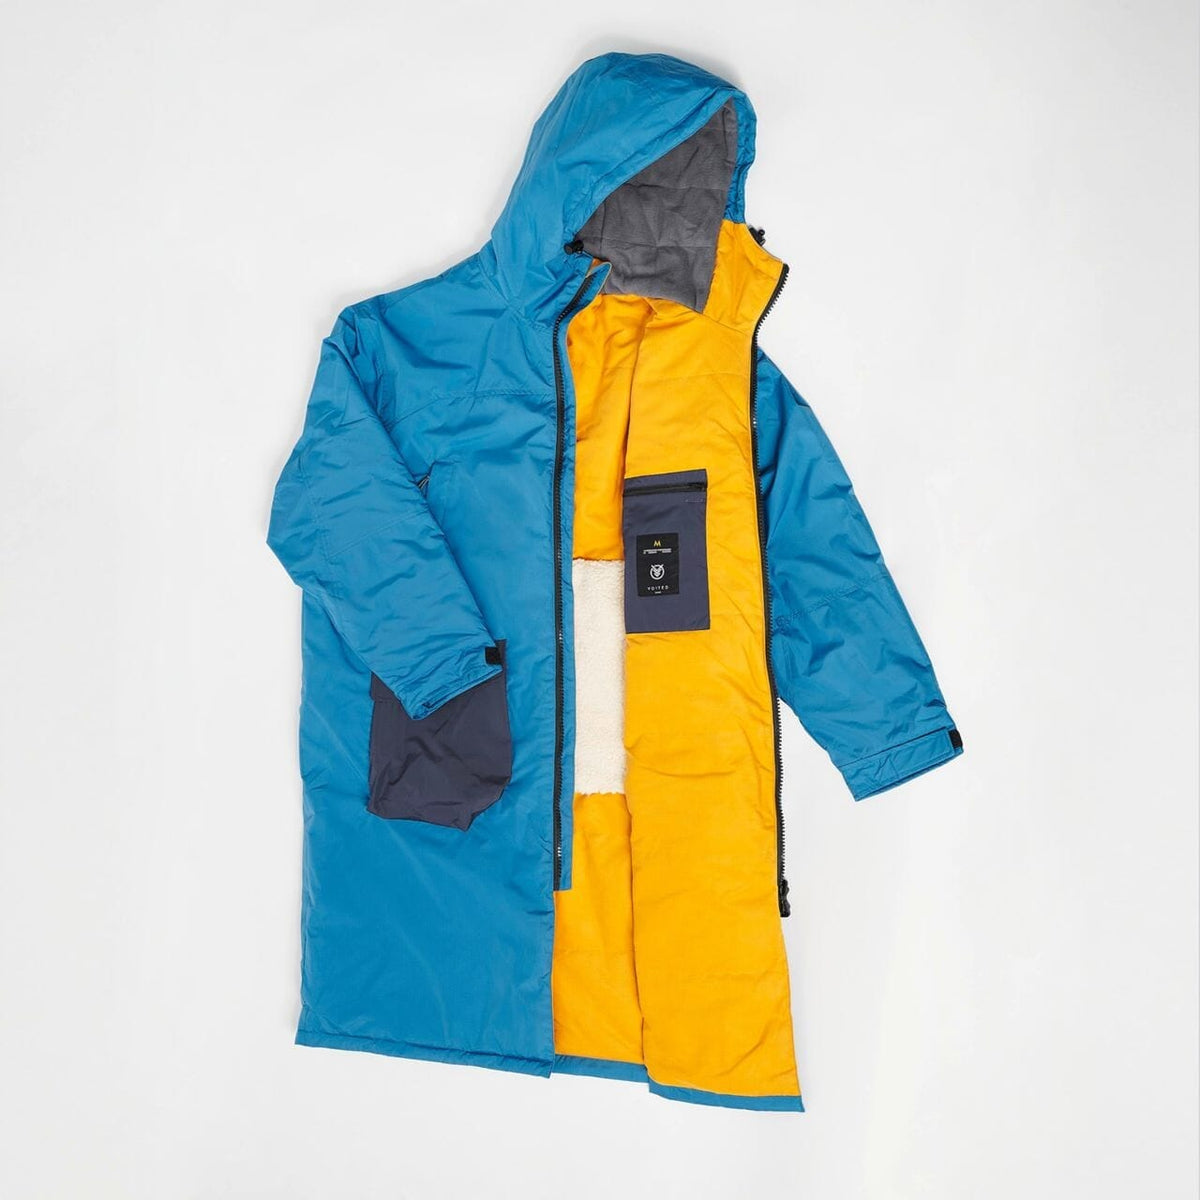 VOITED 2nd Edition Outdoor Changing Robe & Drycoat for Surfing, Camping, Vanlife & Wild Swimming - Blue Steel Changewear VOITED 